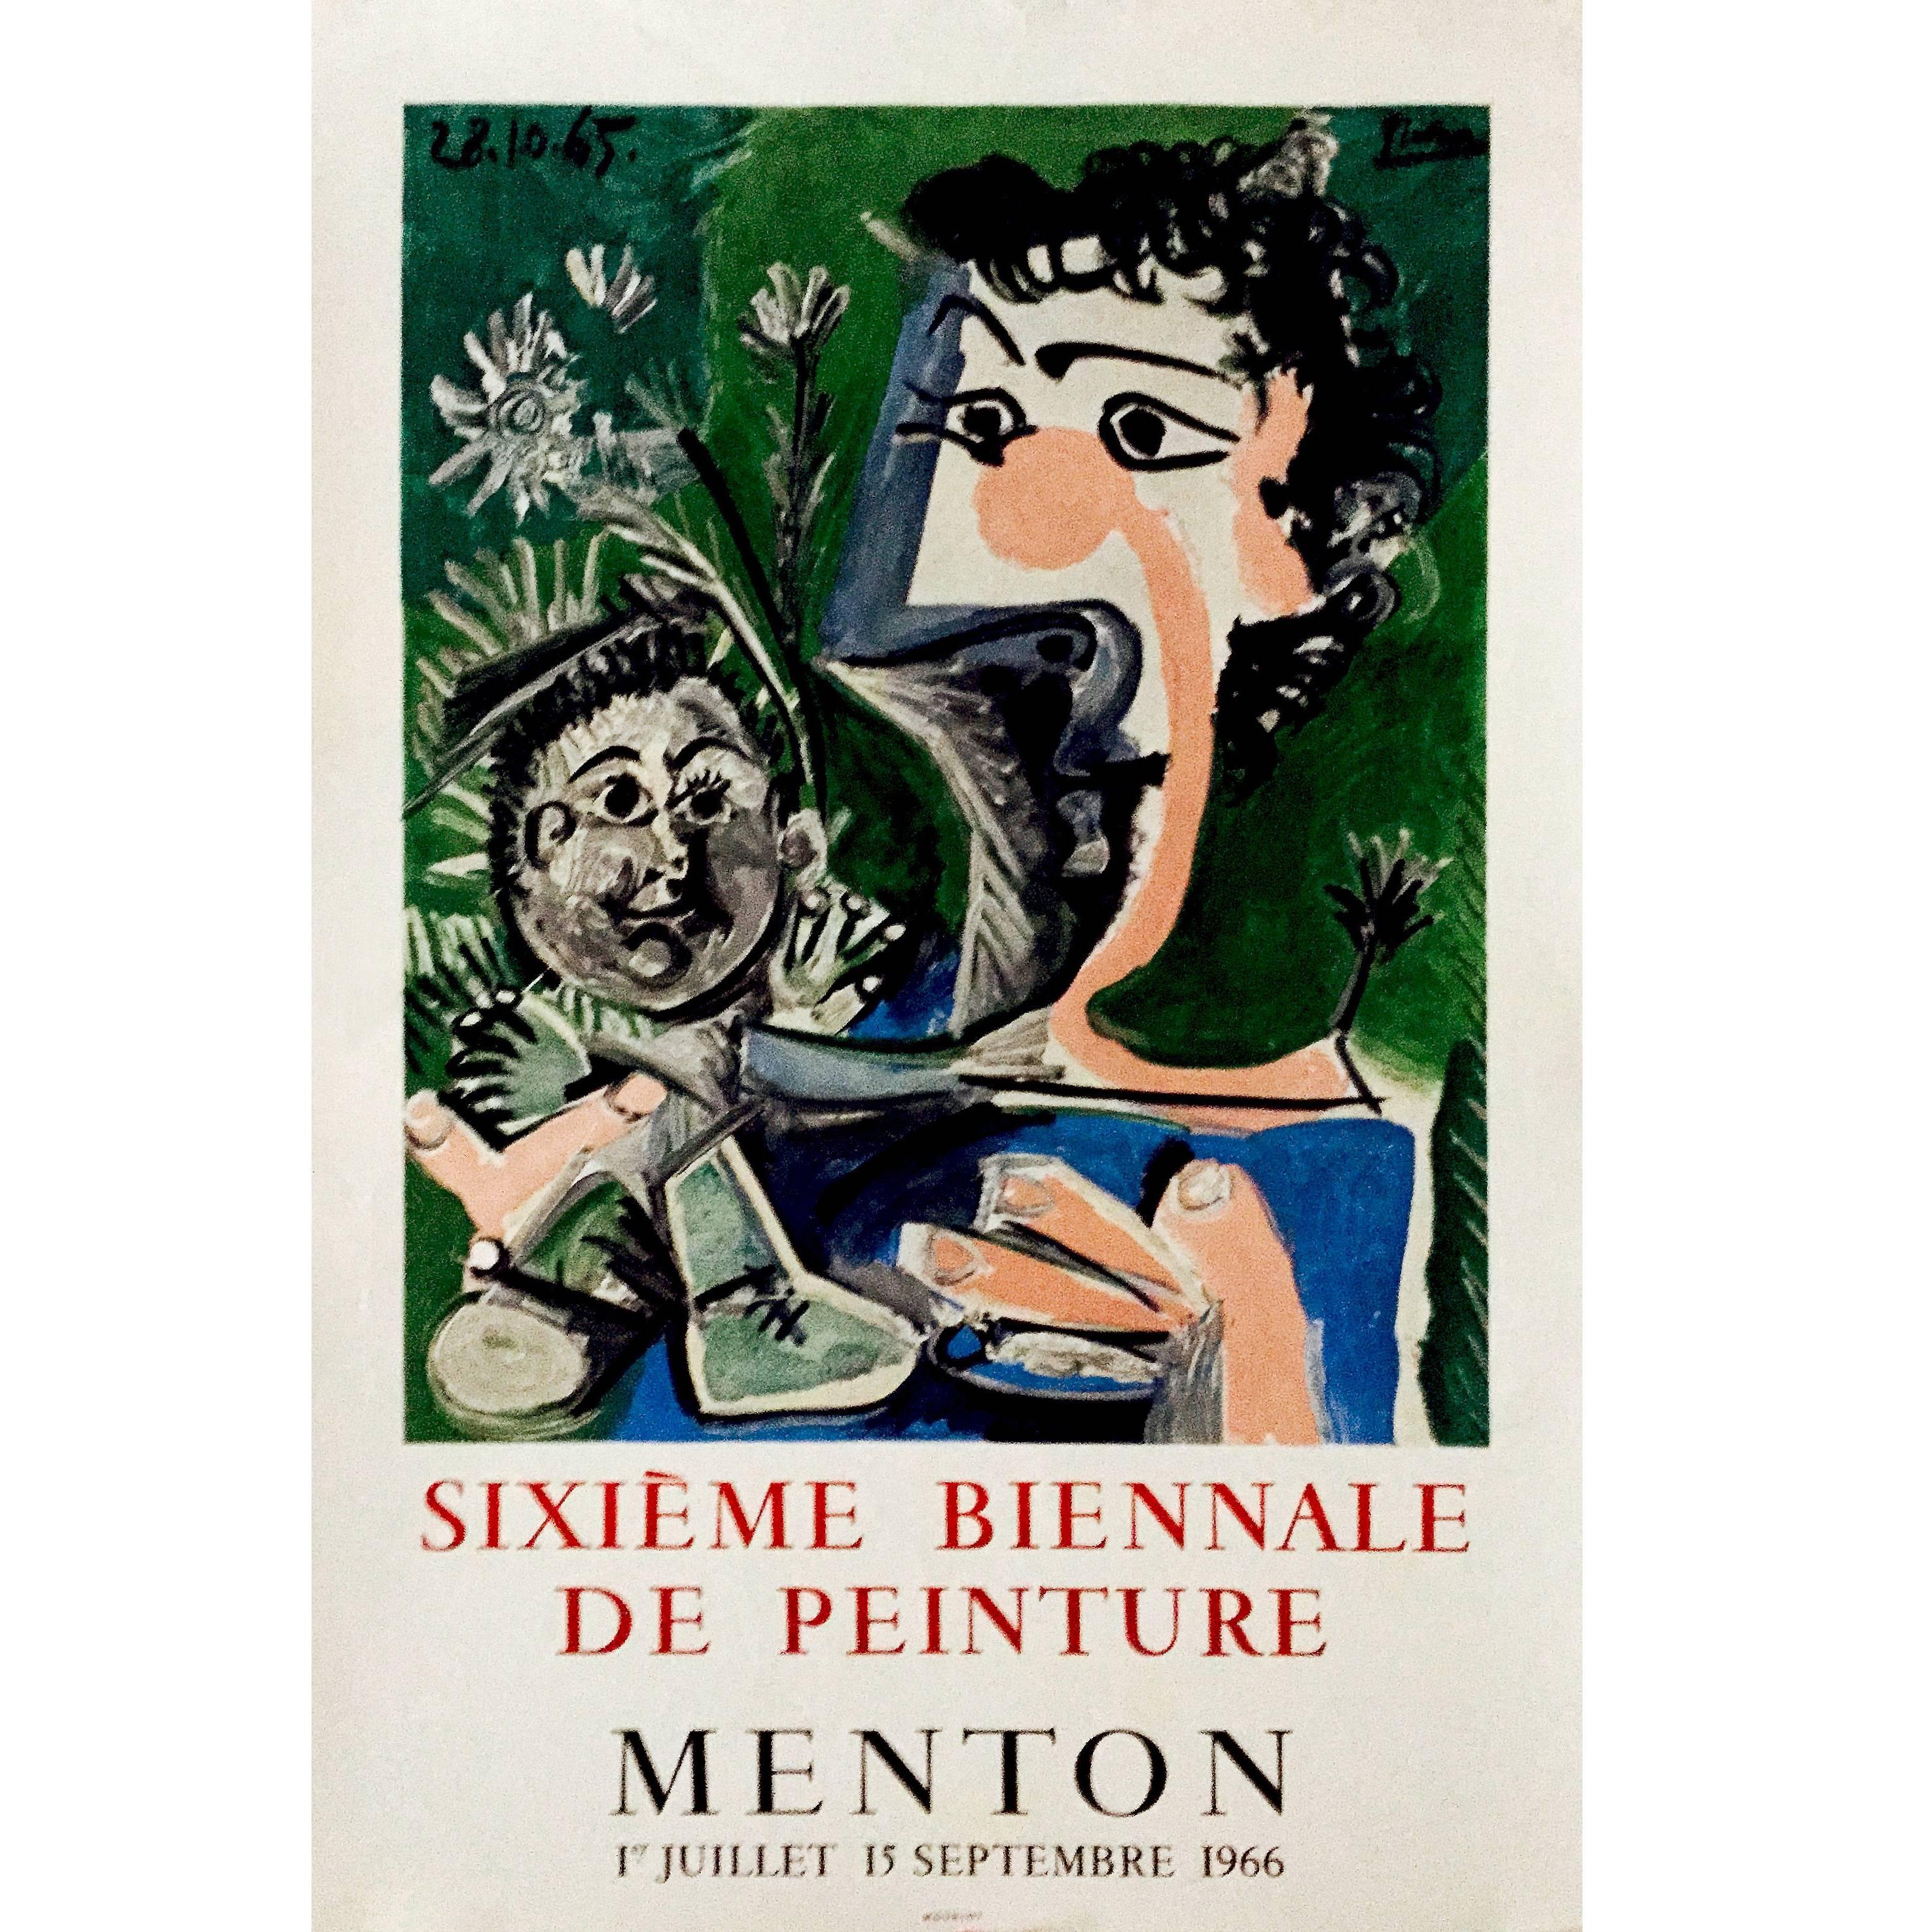 French Mourlot Exhibition Poster for a Picasso Exhibition, Menton, 1966